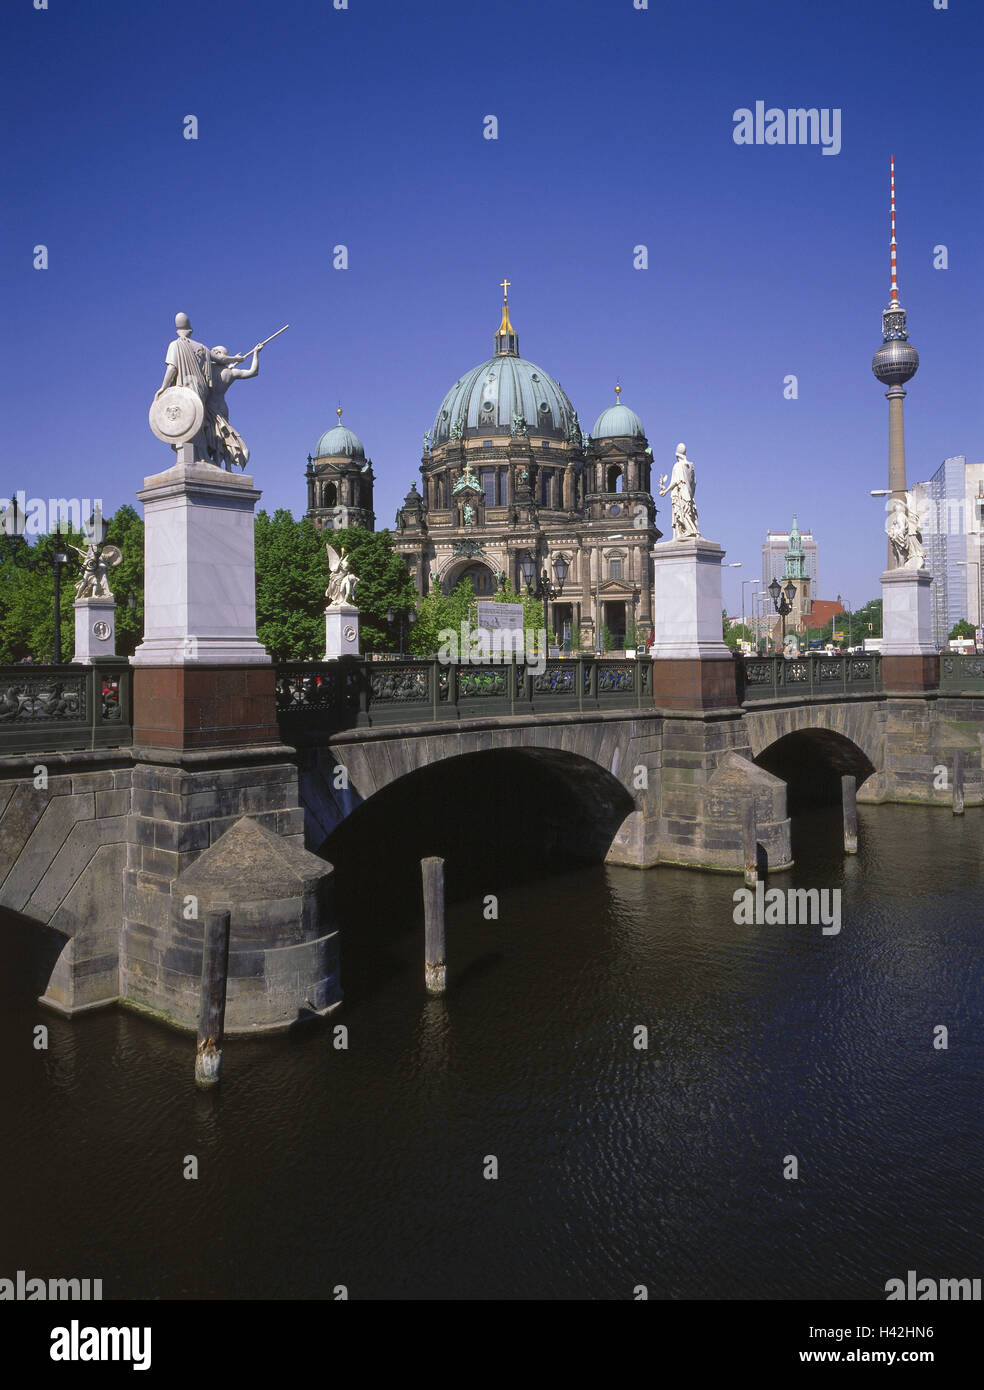 Germany, Berlin, Berlin cathedral, castle bridge, the Spree, Europe, capital, town, cathedral, main church, church, building, structure, architectural style, architecture, builds in 1894-1905, Julius Raschdorff, architecture, landmark, place of interest, bridge, sculptures, river, background, television tower, townscape Stock Photo